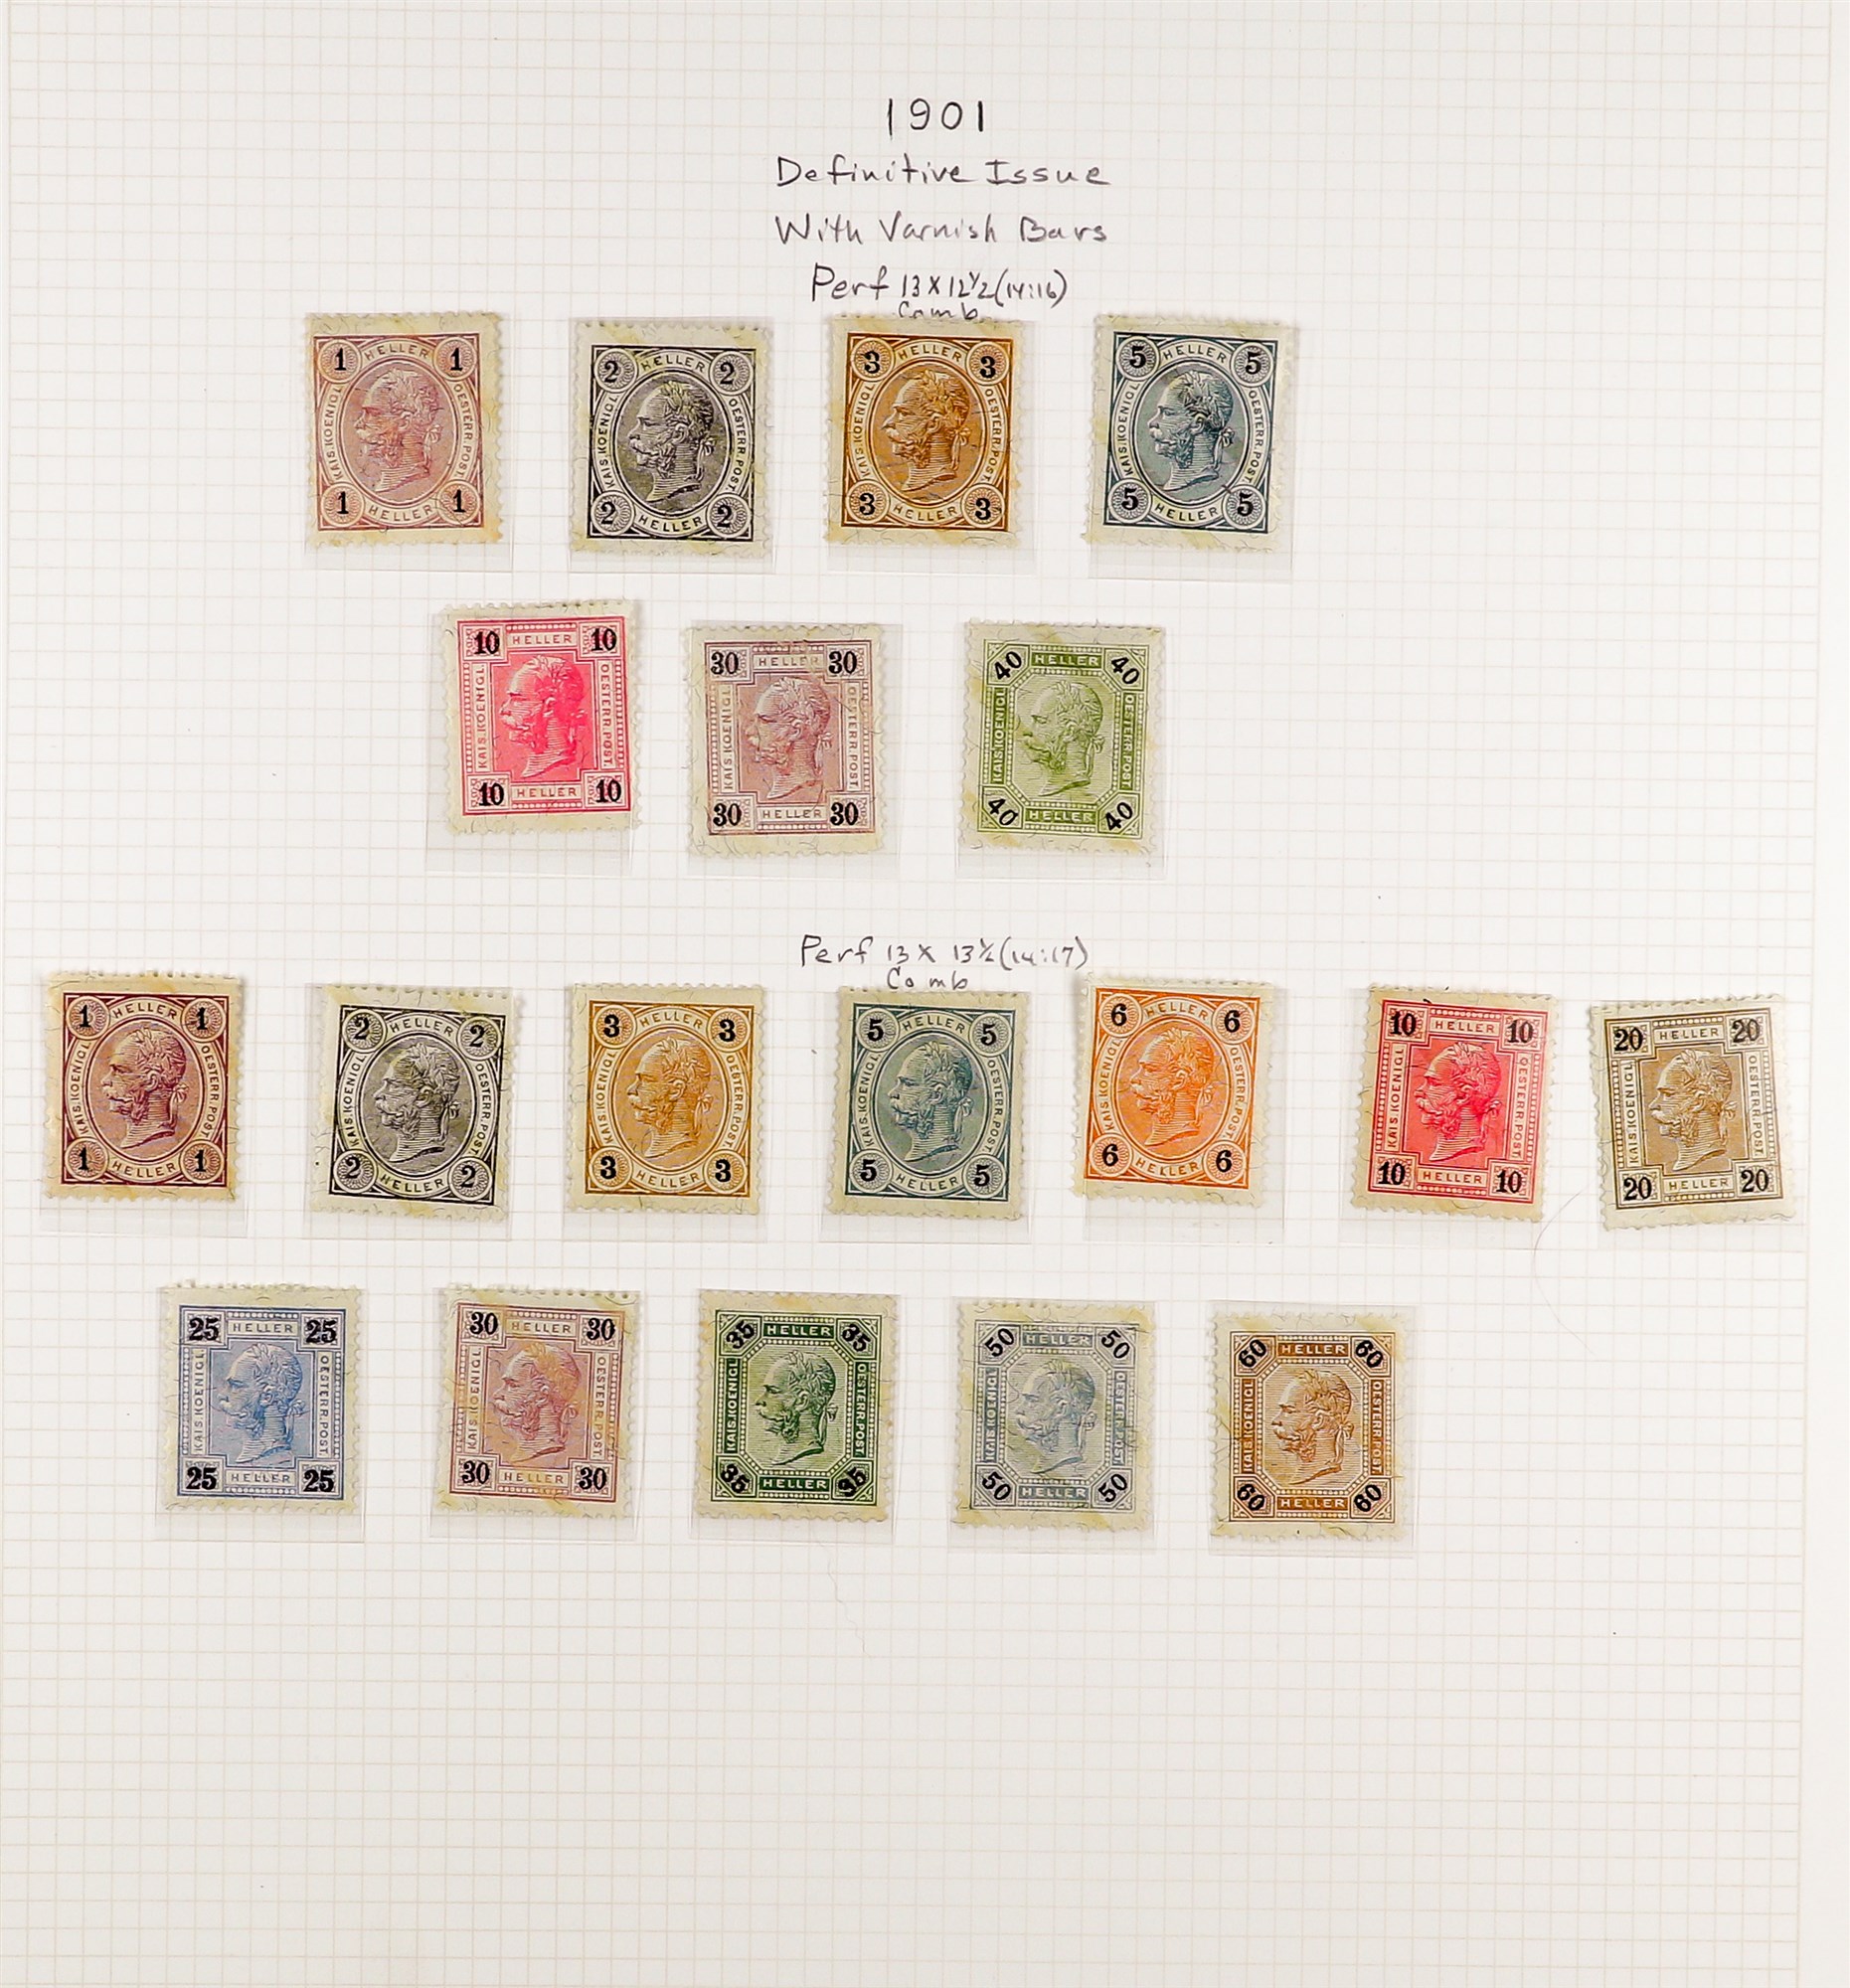 AUSTRIA 1890 - 1907 FRANZ JOSEF DEFINITIVES collection of over 180 mint / some never hinged mint - Image 8 of 11